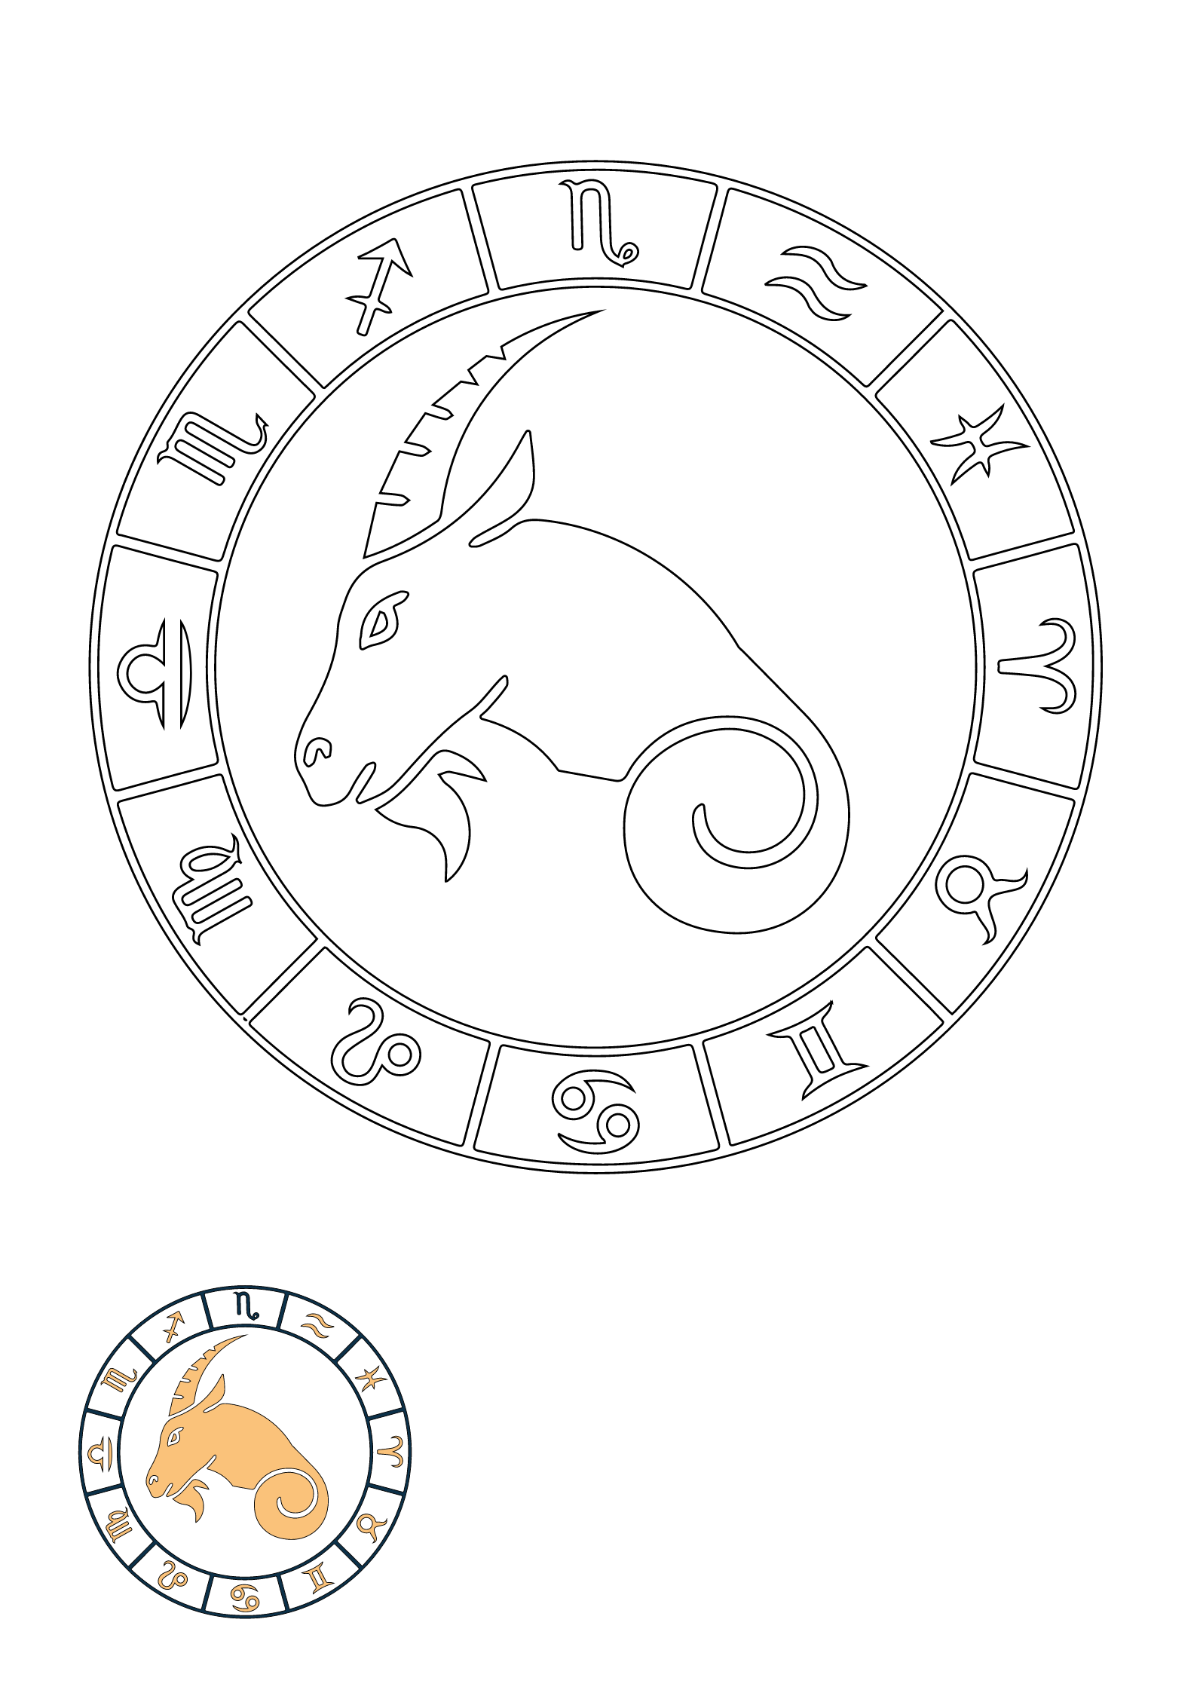 Circle Capricorn coloring page Template